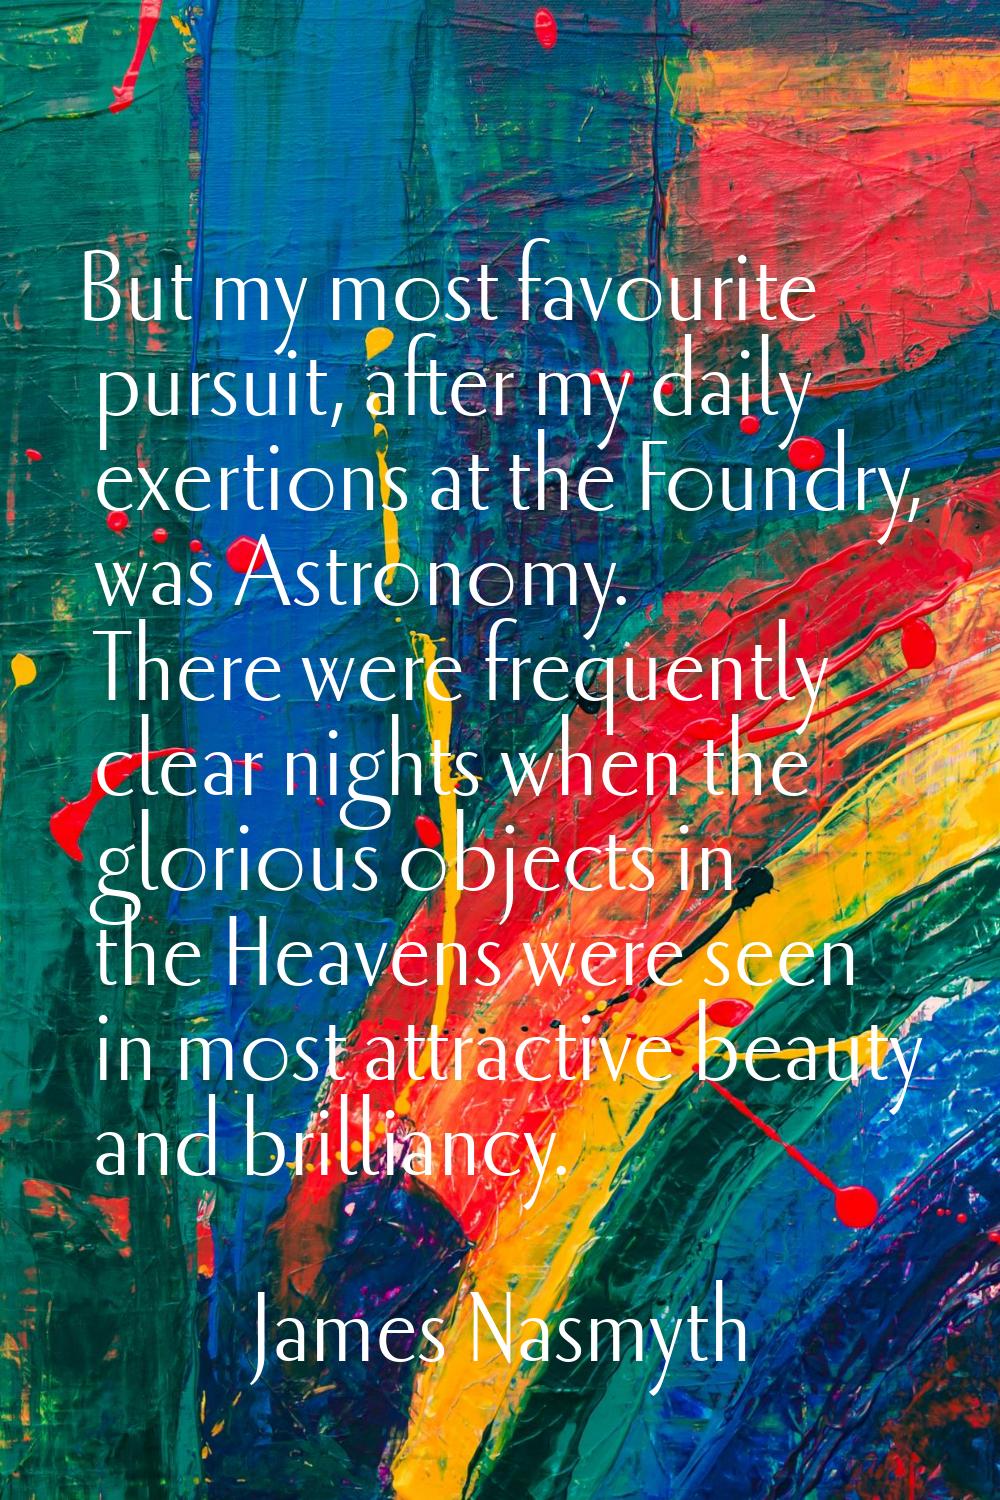 But my most favourite pursuit, after my daily exertions at the Foundry, was Astronomy. There were f